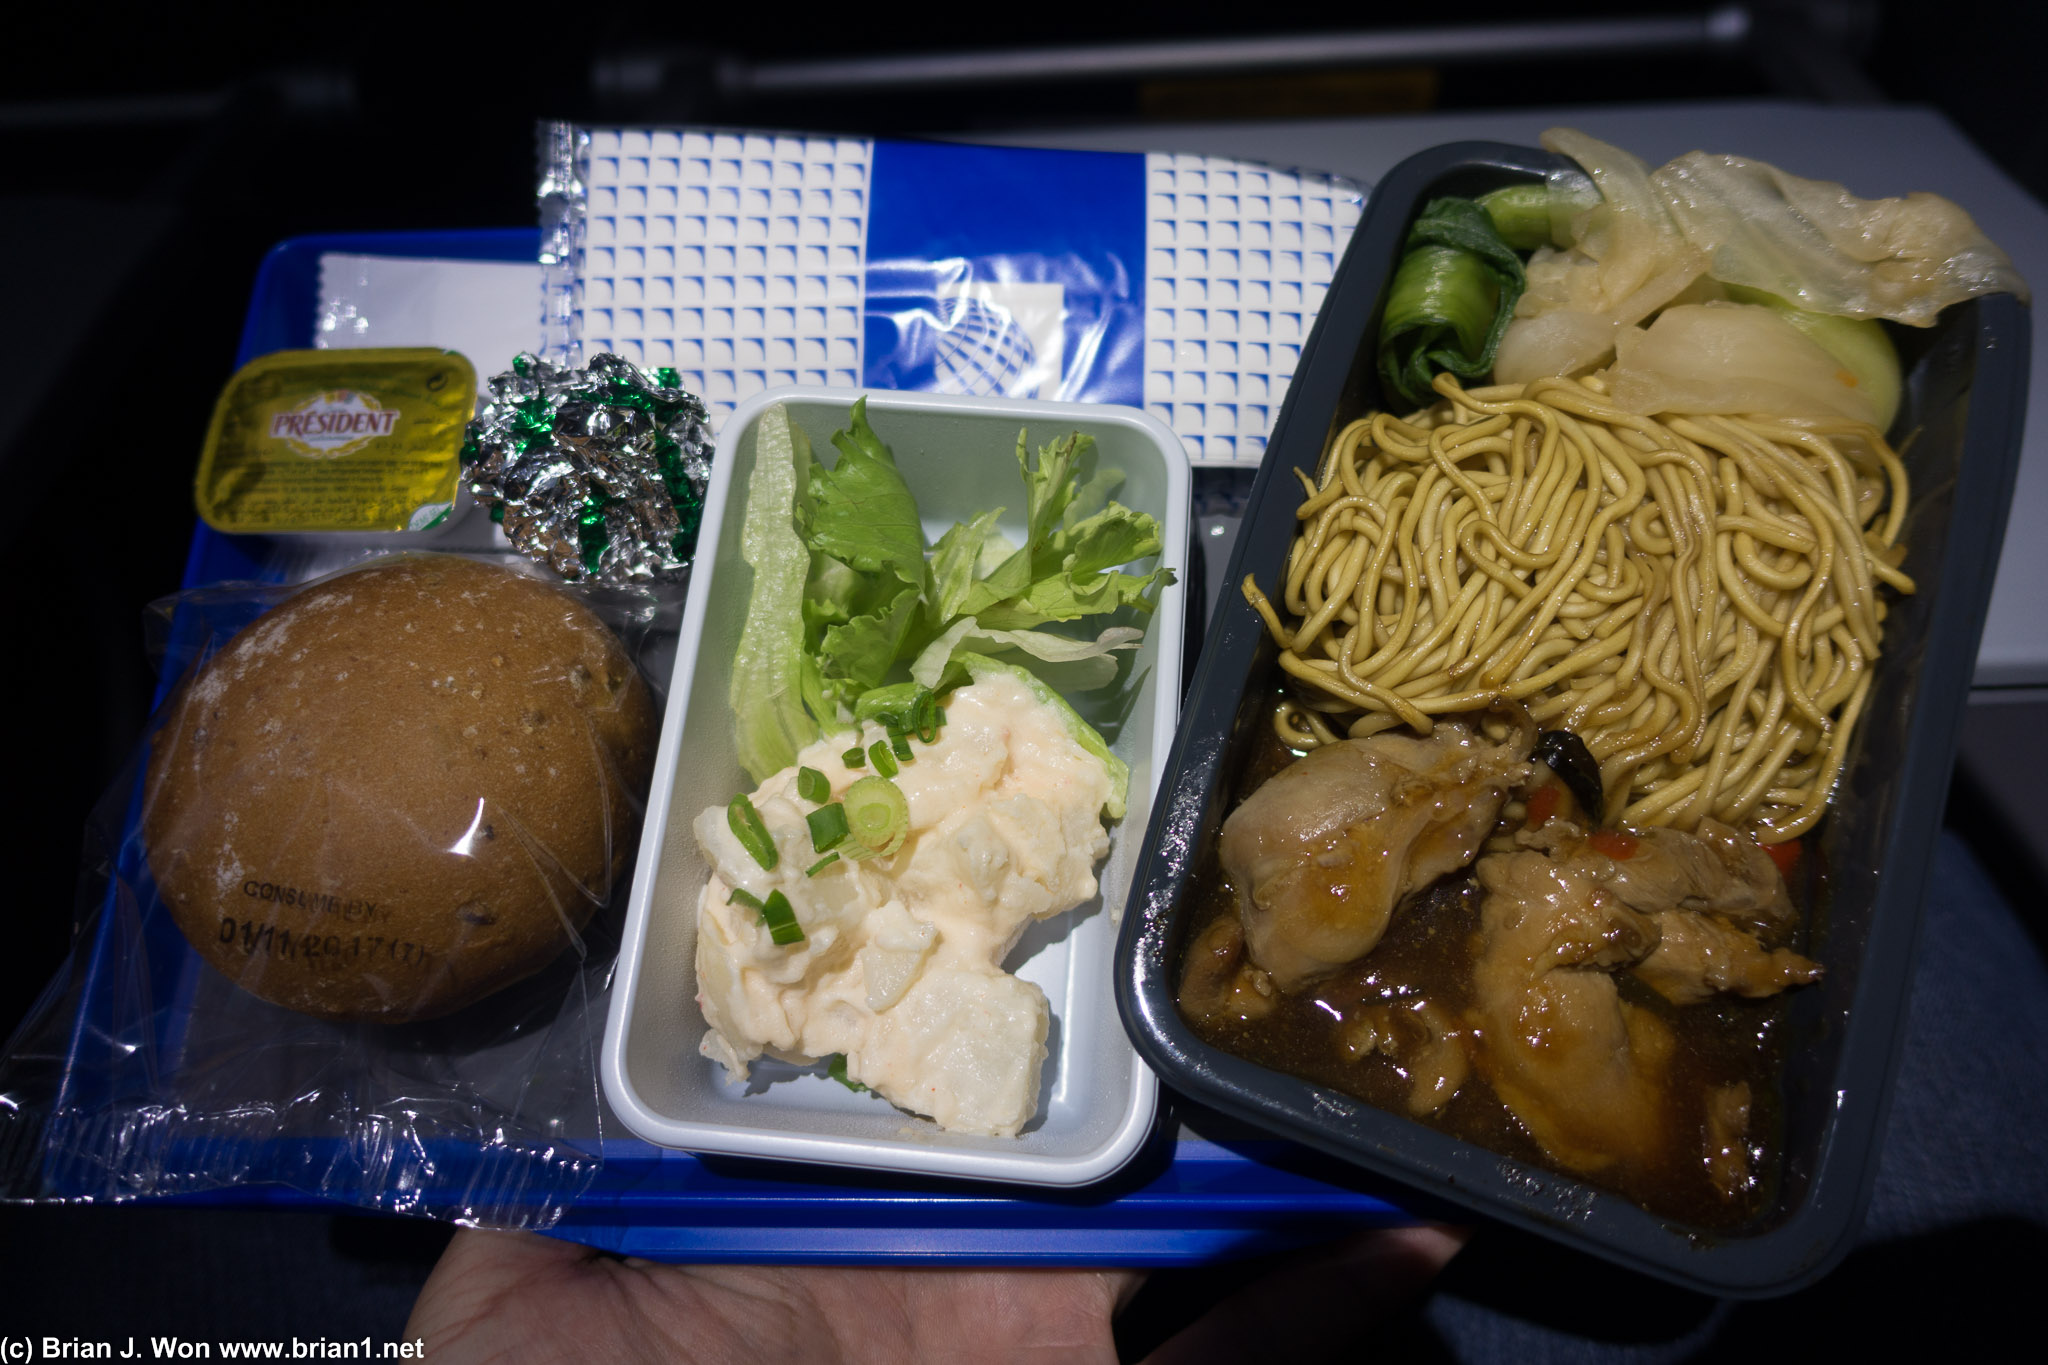 Hope you like noodles. Actually pretty good for economy class gruel.